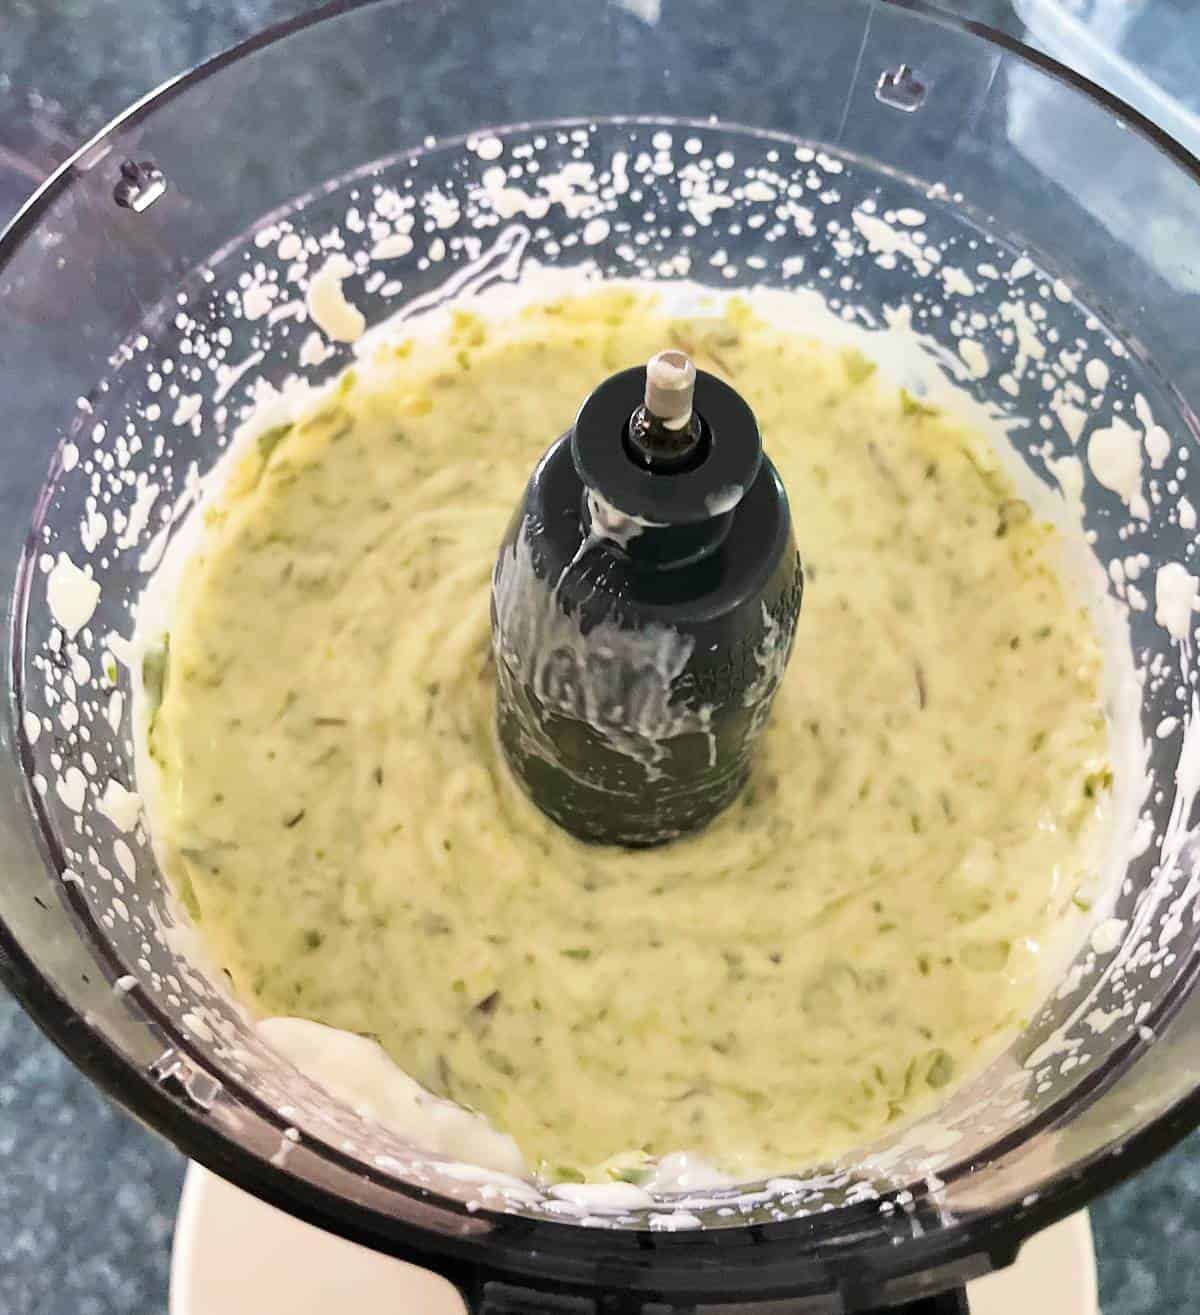 asparagus and yogurt puréed together in a food processor.